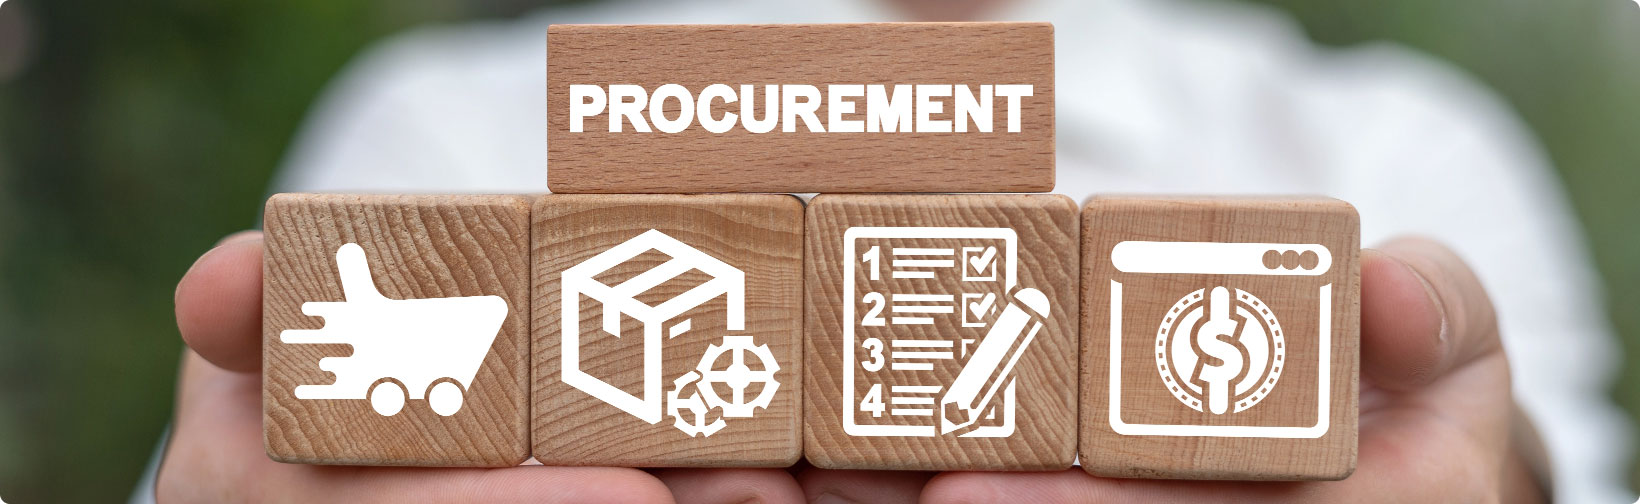 Deciphering the When: Optimal Timing for RFP Issuance in Procurement